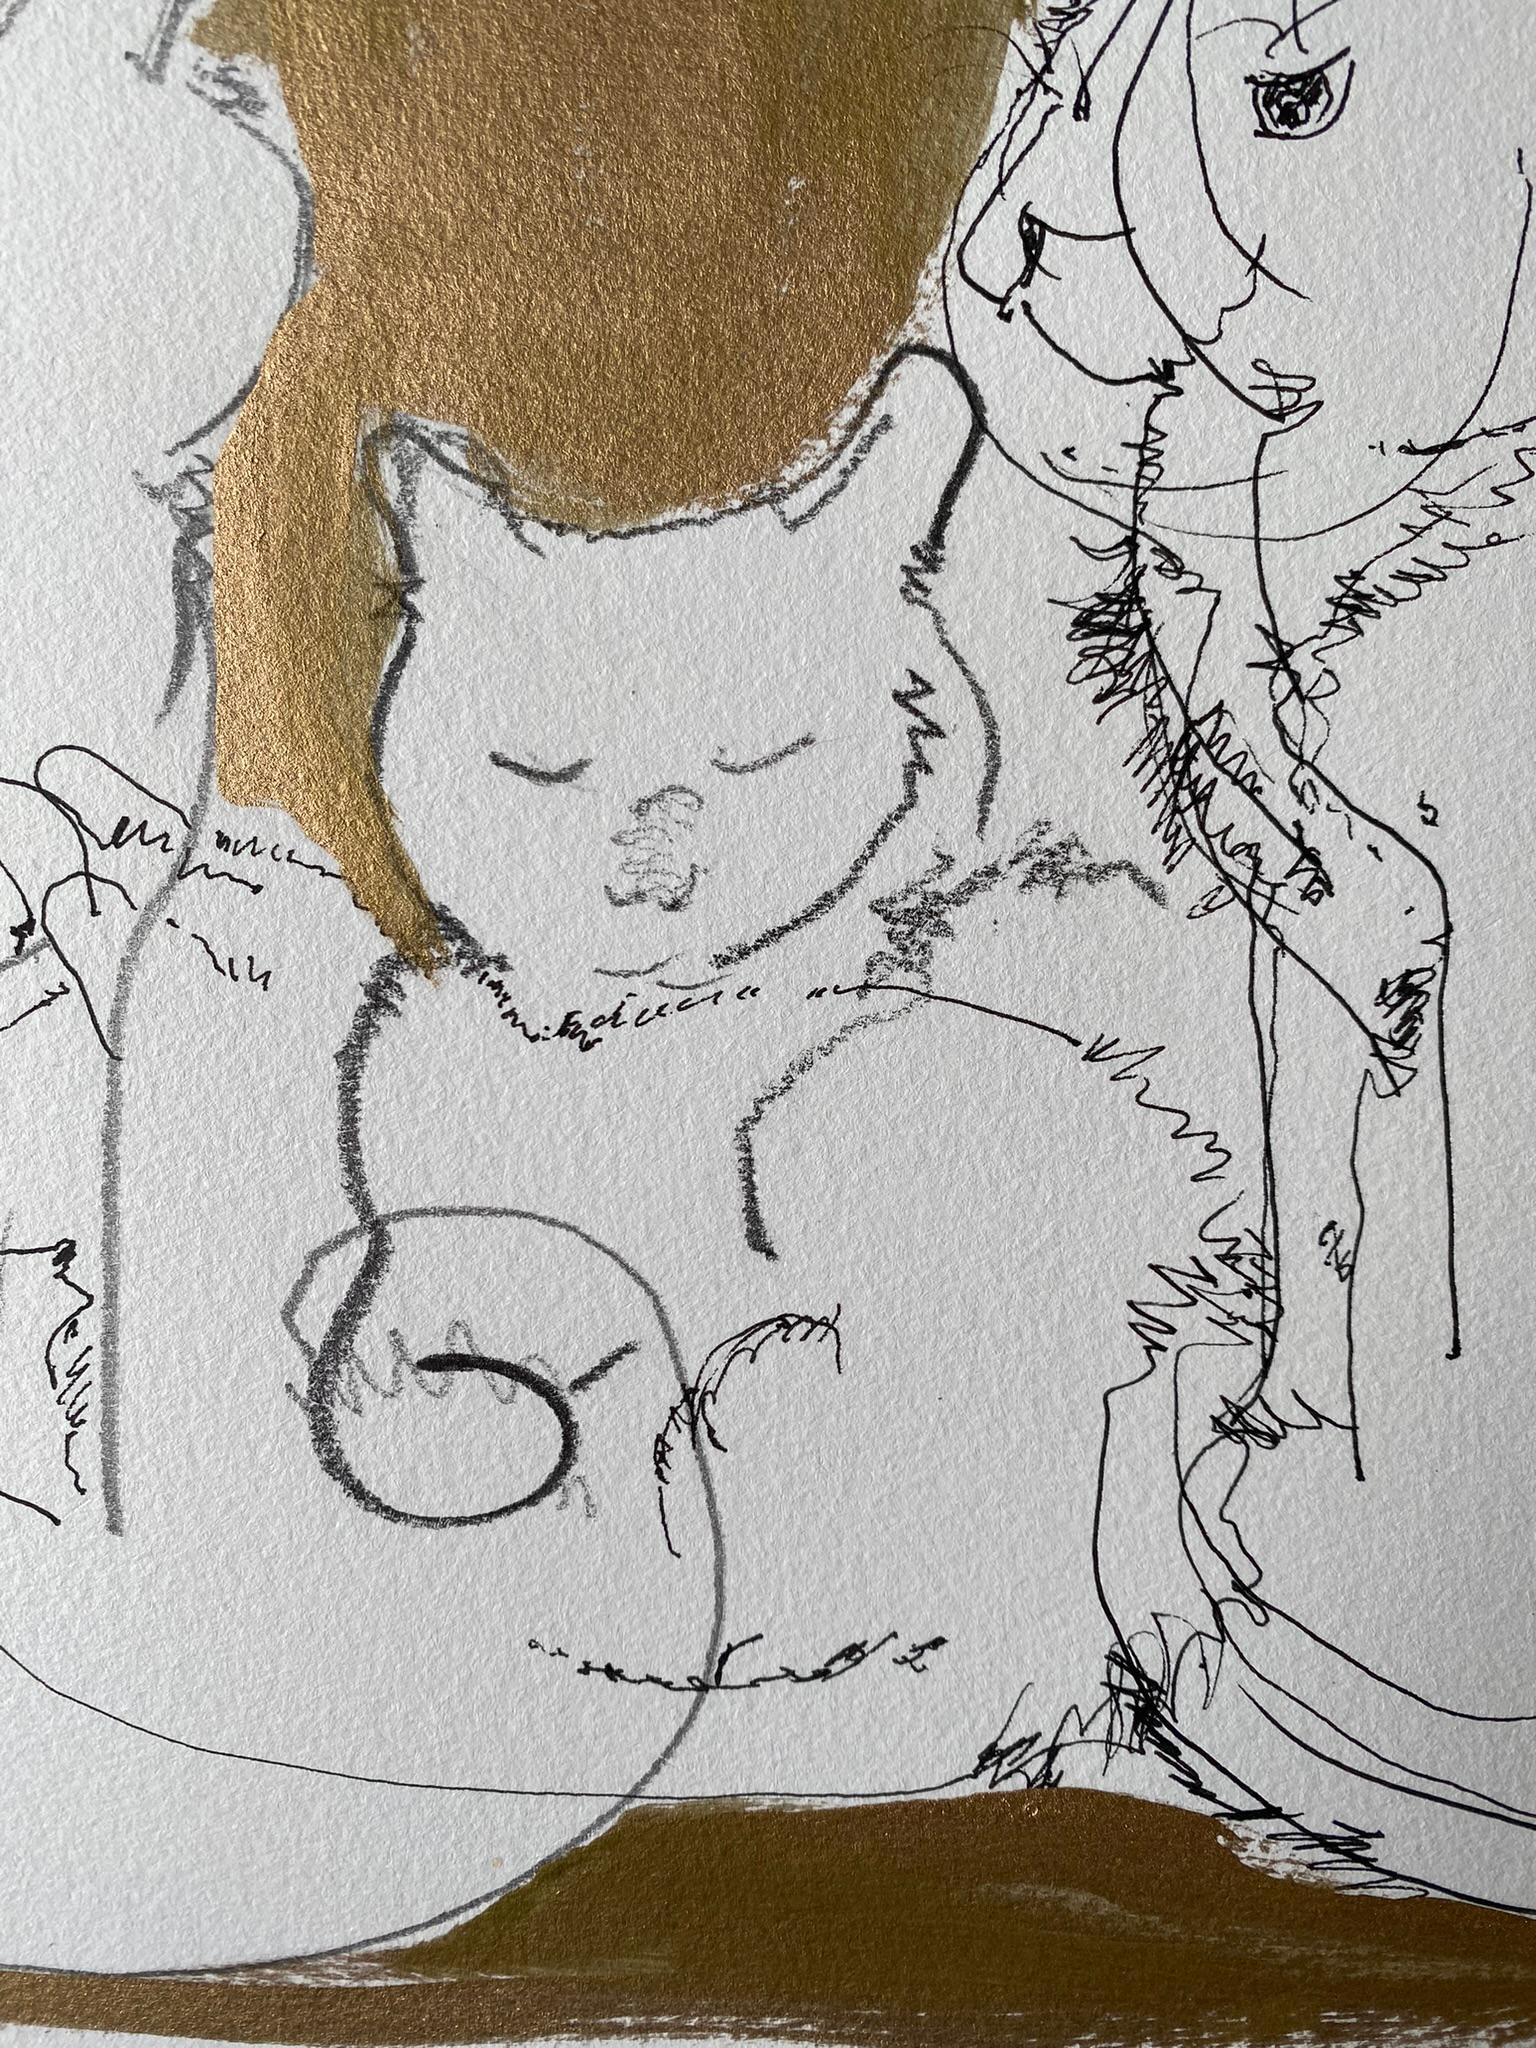 Original Set-Breakfast with Cat Series-British Award Artist-Gold, ink on papers For Sale 16